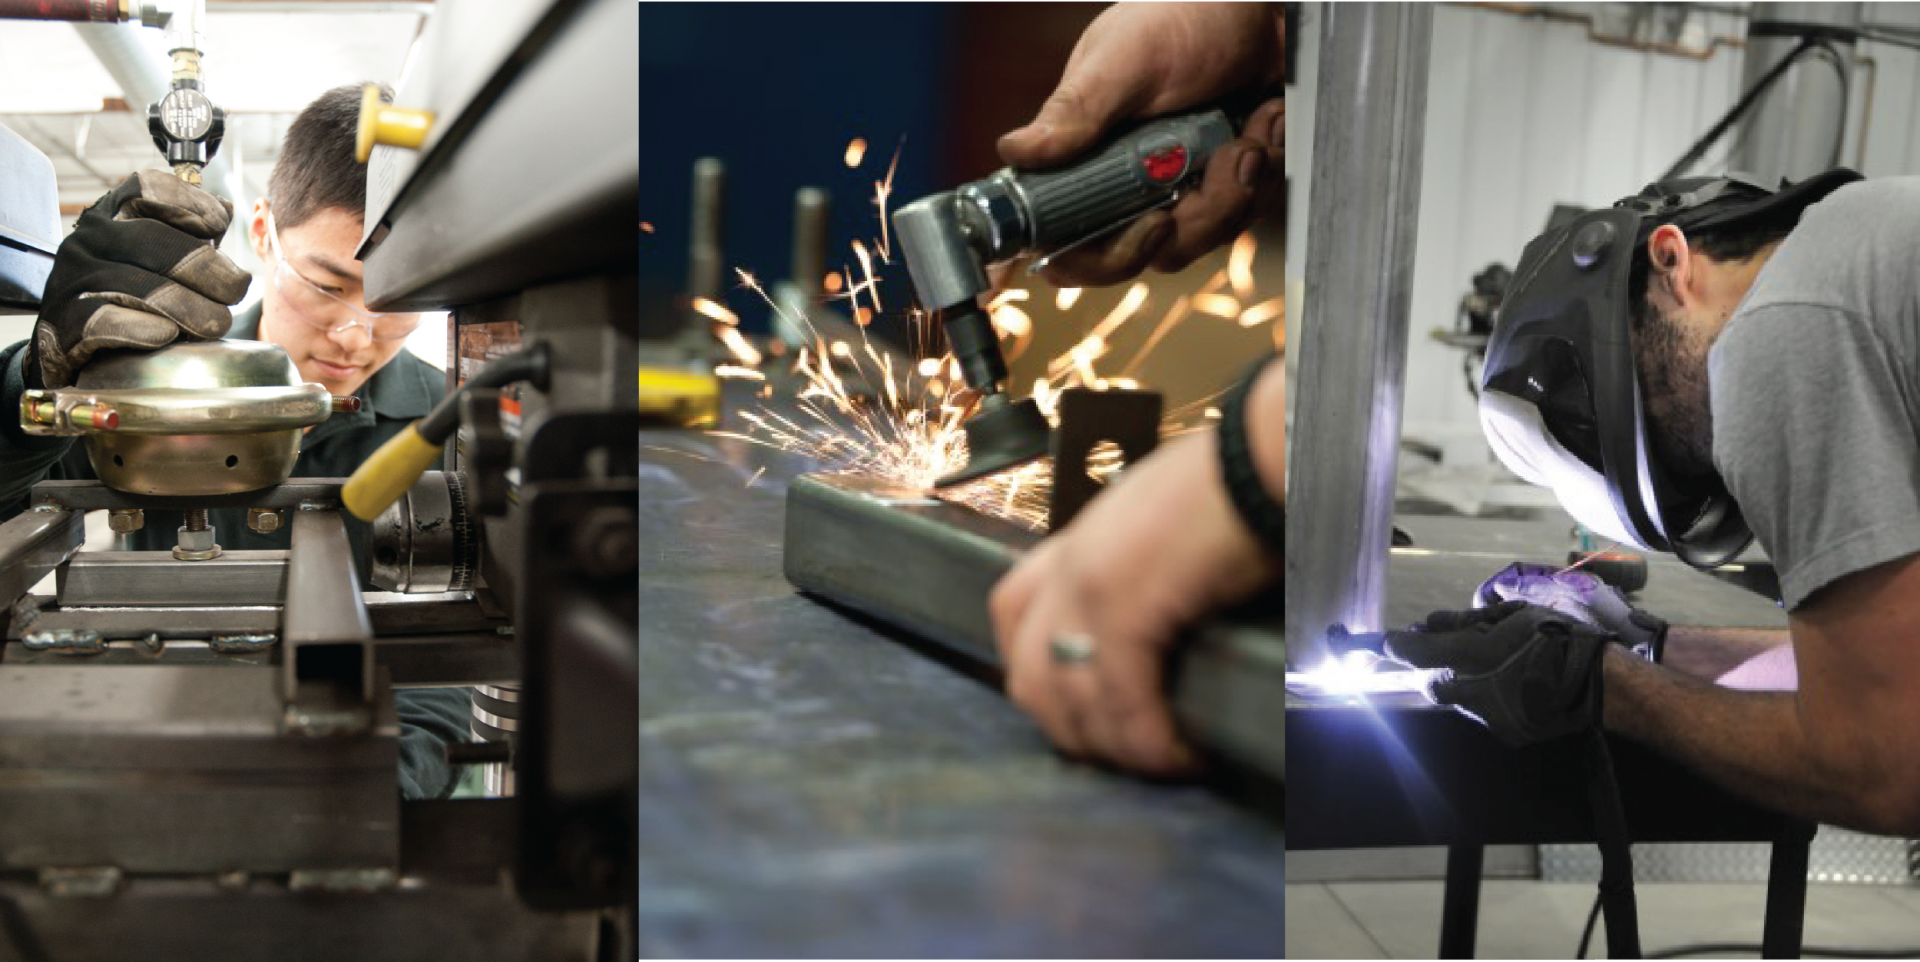 Three photos showing different aspects of manufacturing